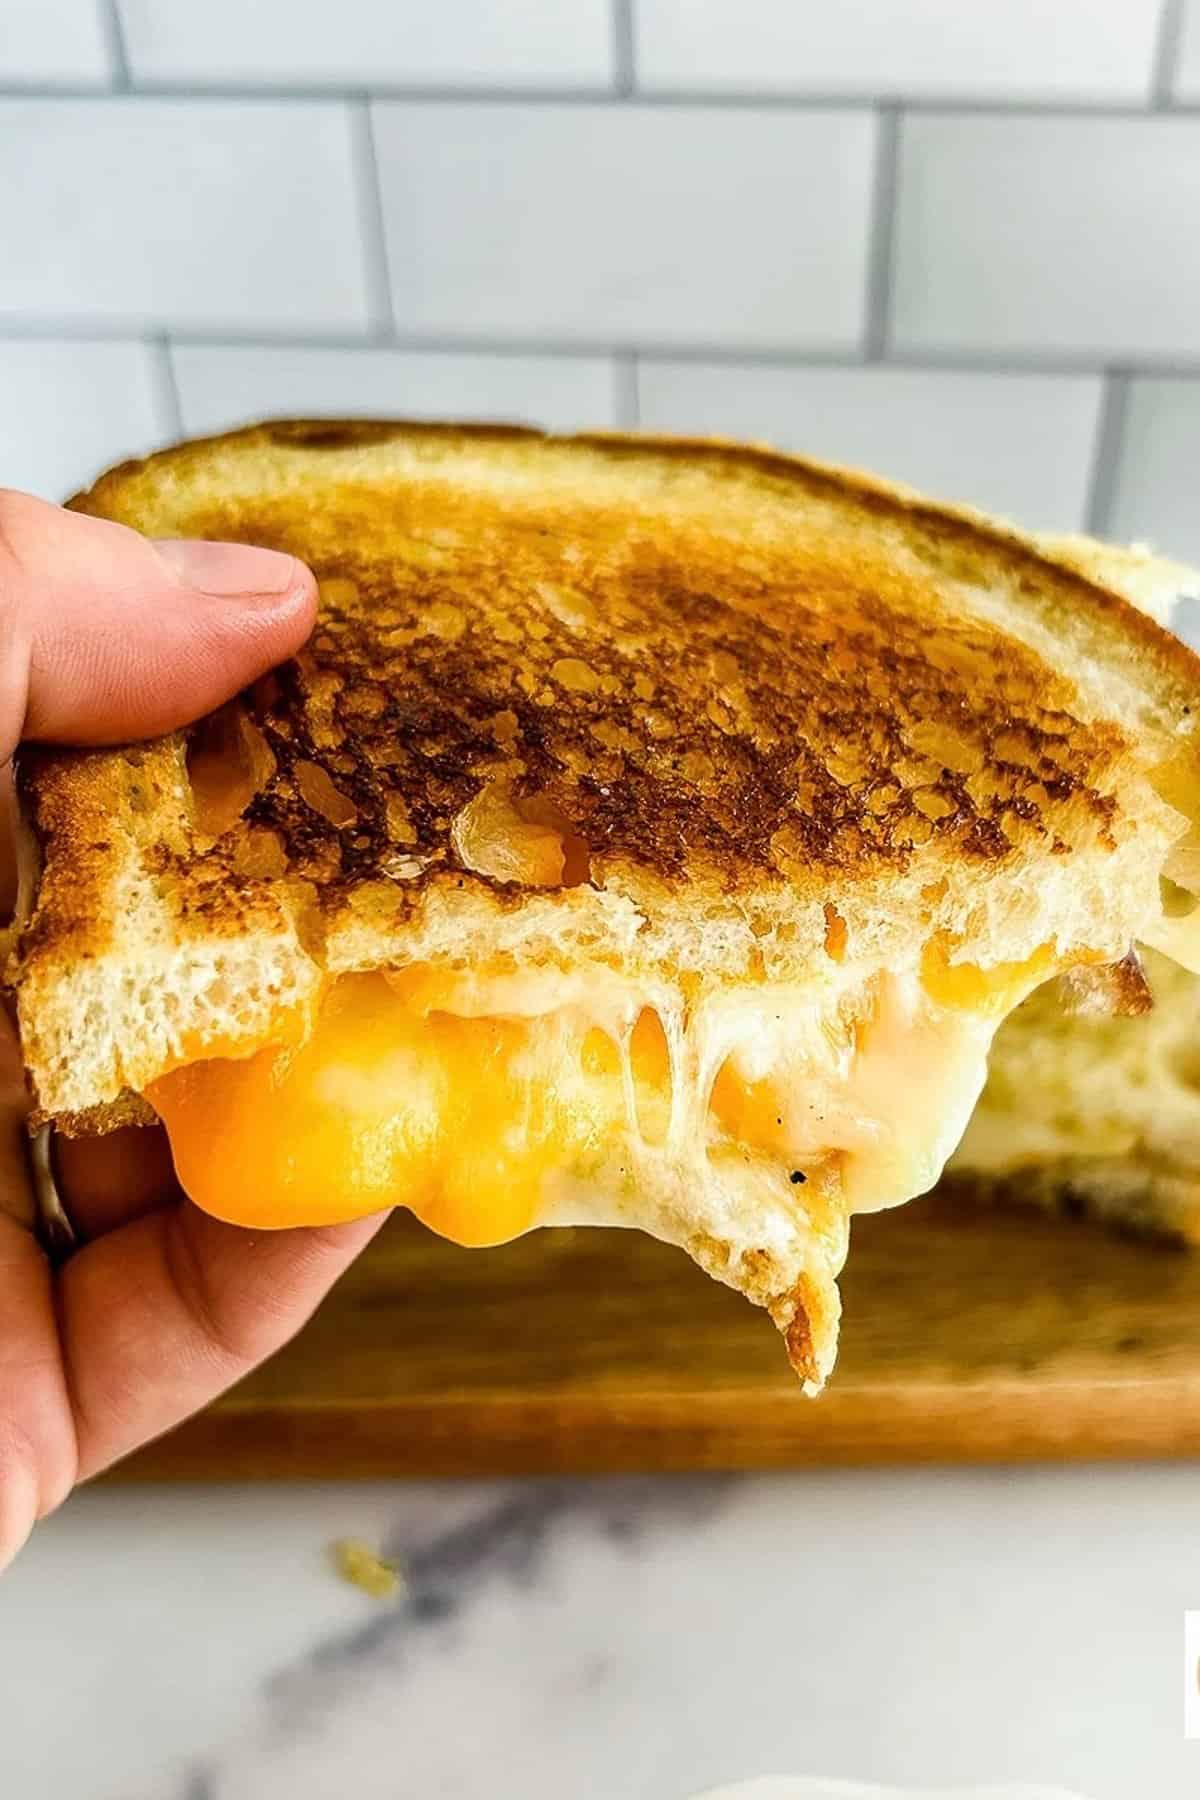 6. Sourdough Grilled Cheese